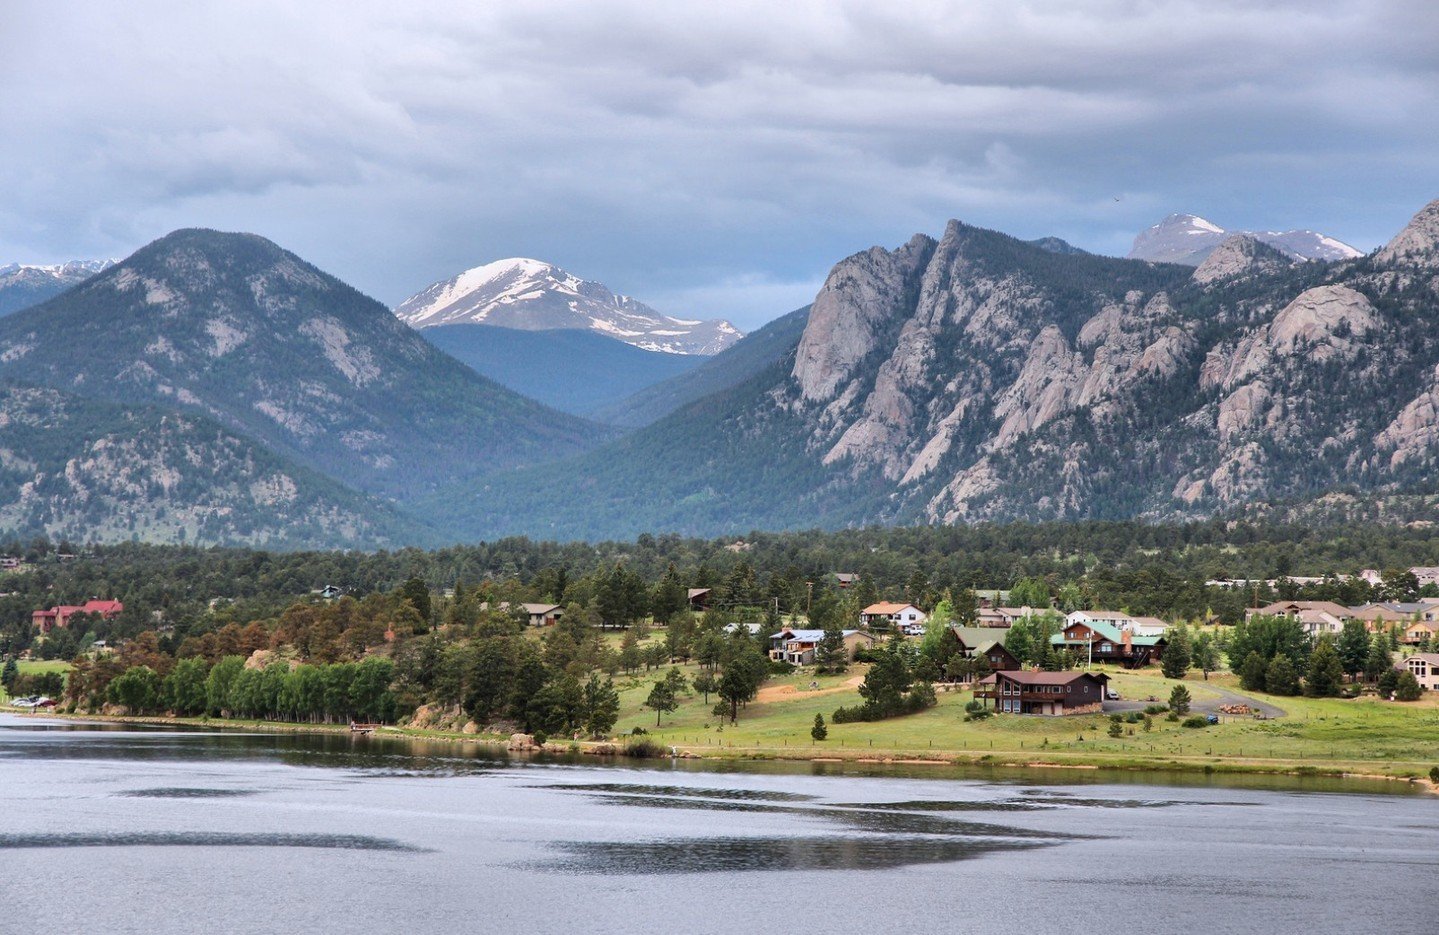 Go ahead, plan your Estes Park vacation! 

Considered the Base Camp for our Rocky Mountain National Park

&quot;Estes Park, Colorado is the base camp for amazing adventures in Rocky Mountain National Park and your favorite mountain getaway. Explore t